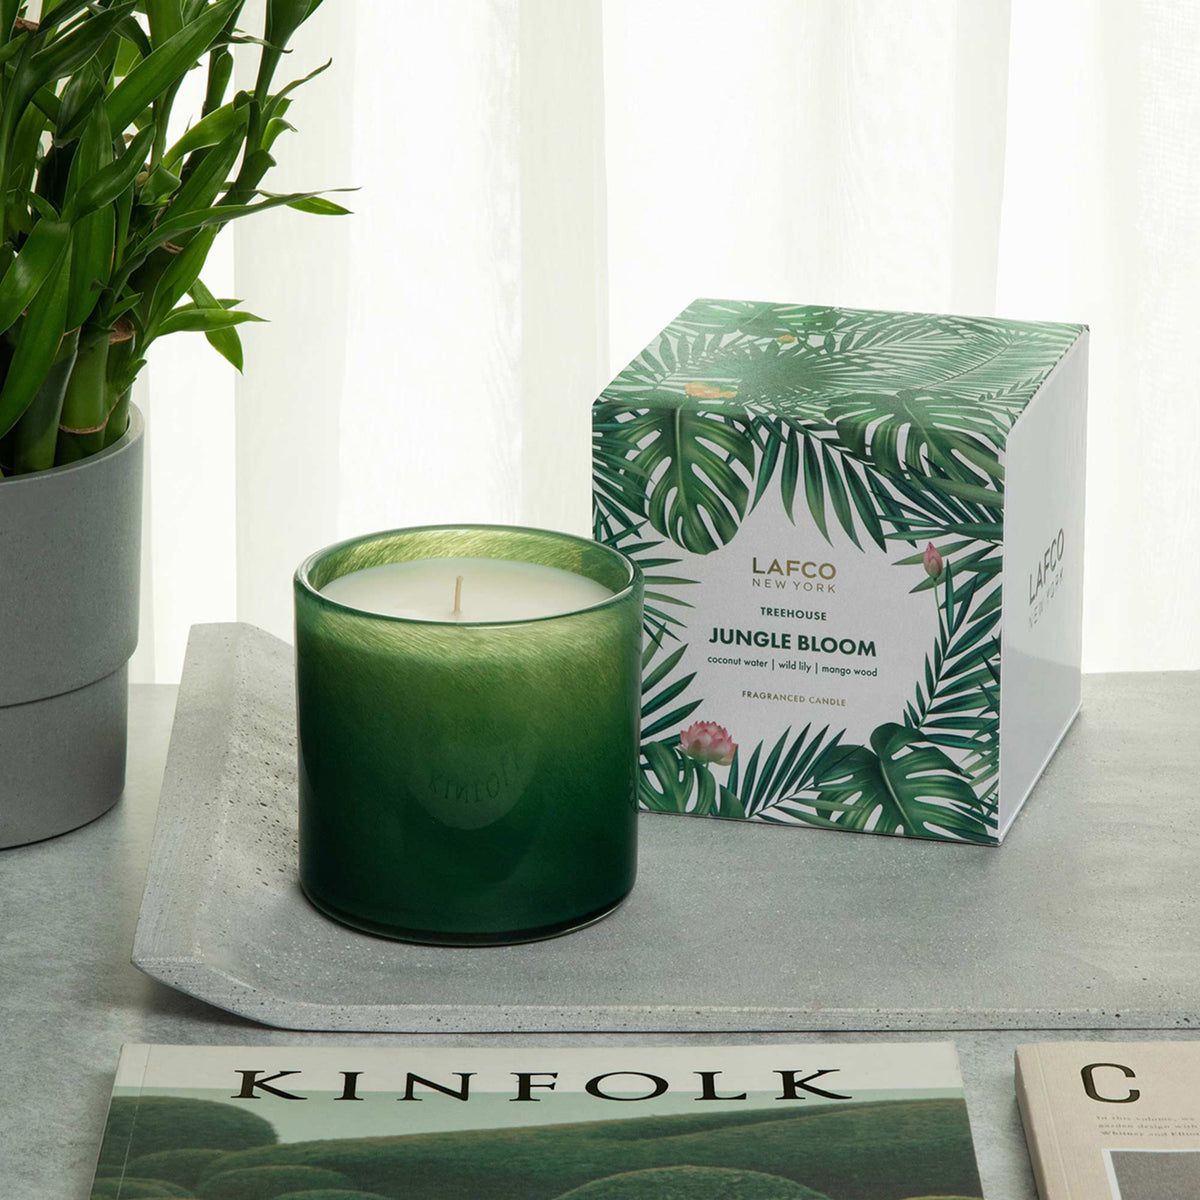 Lafco Jungle Bloom Candle .